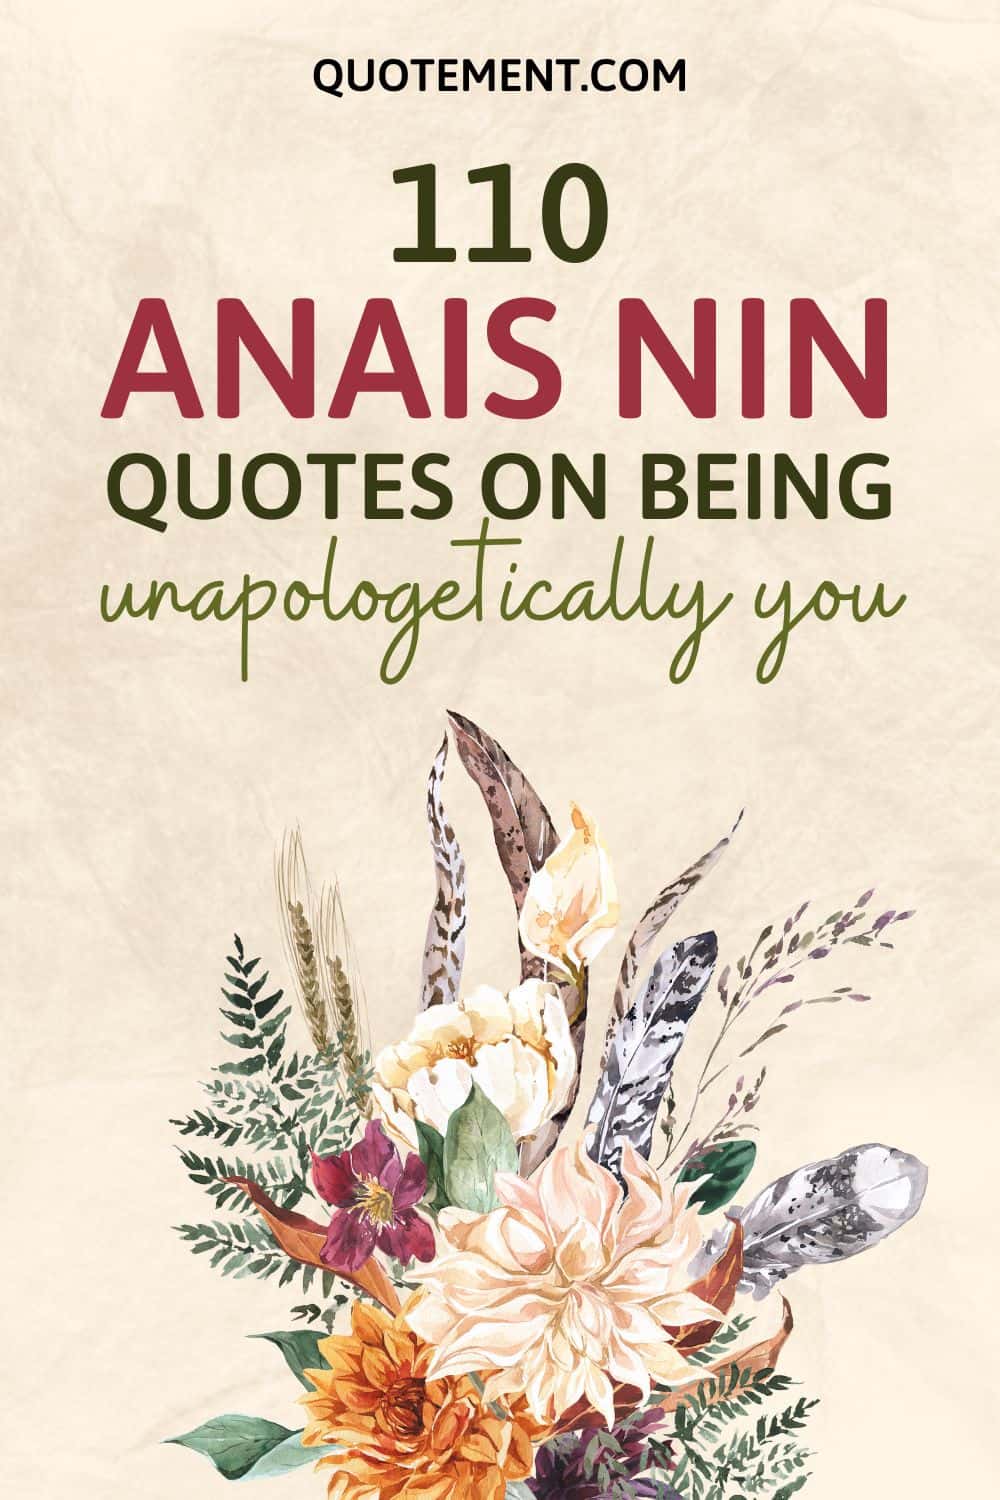 110 Anais Nin Quotes On Being Fierce And Unapologetic
